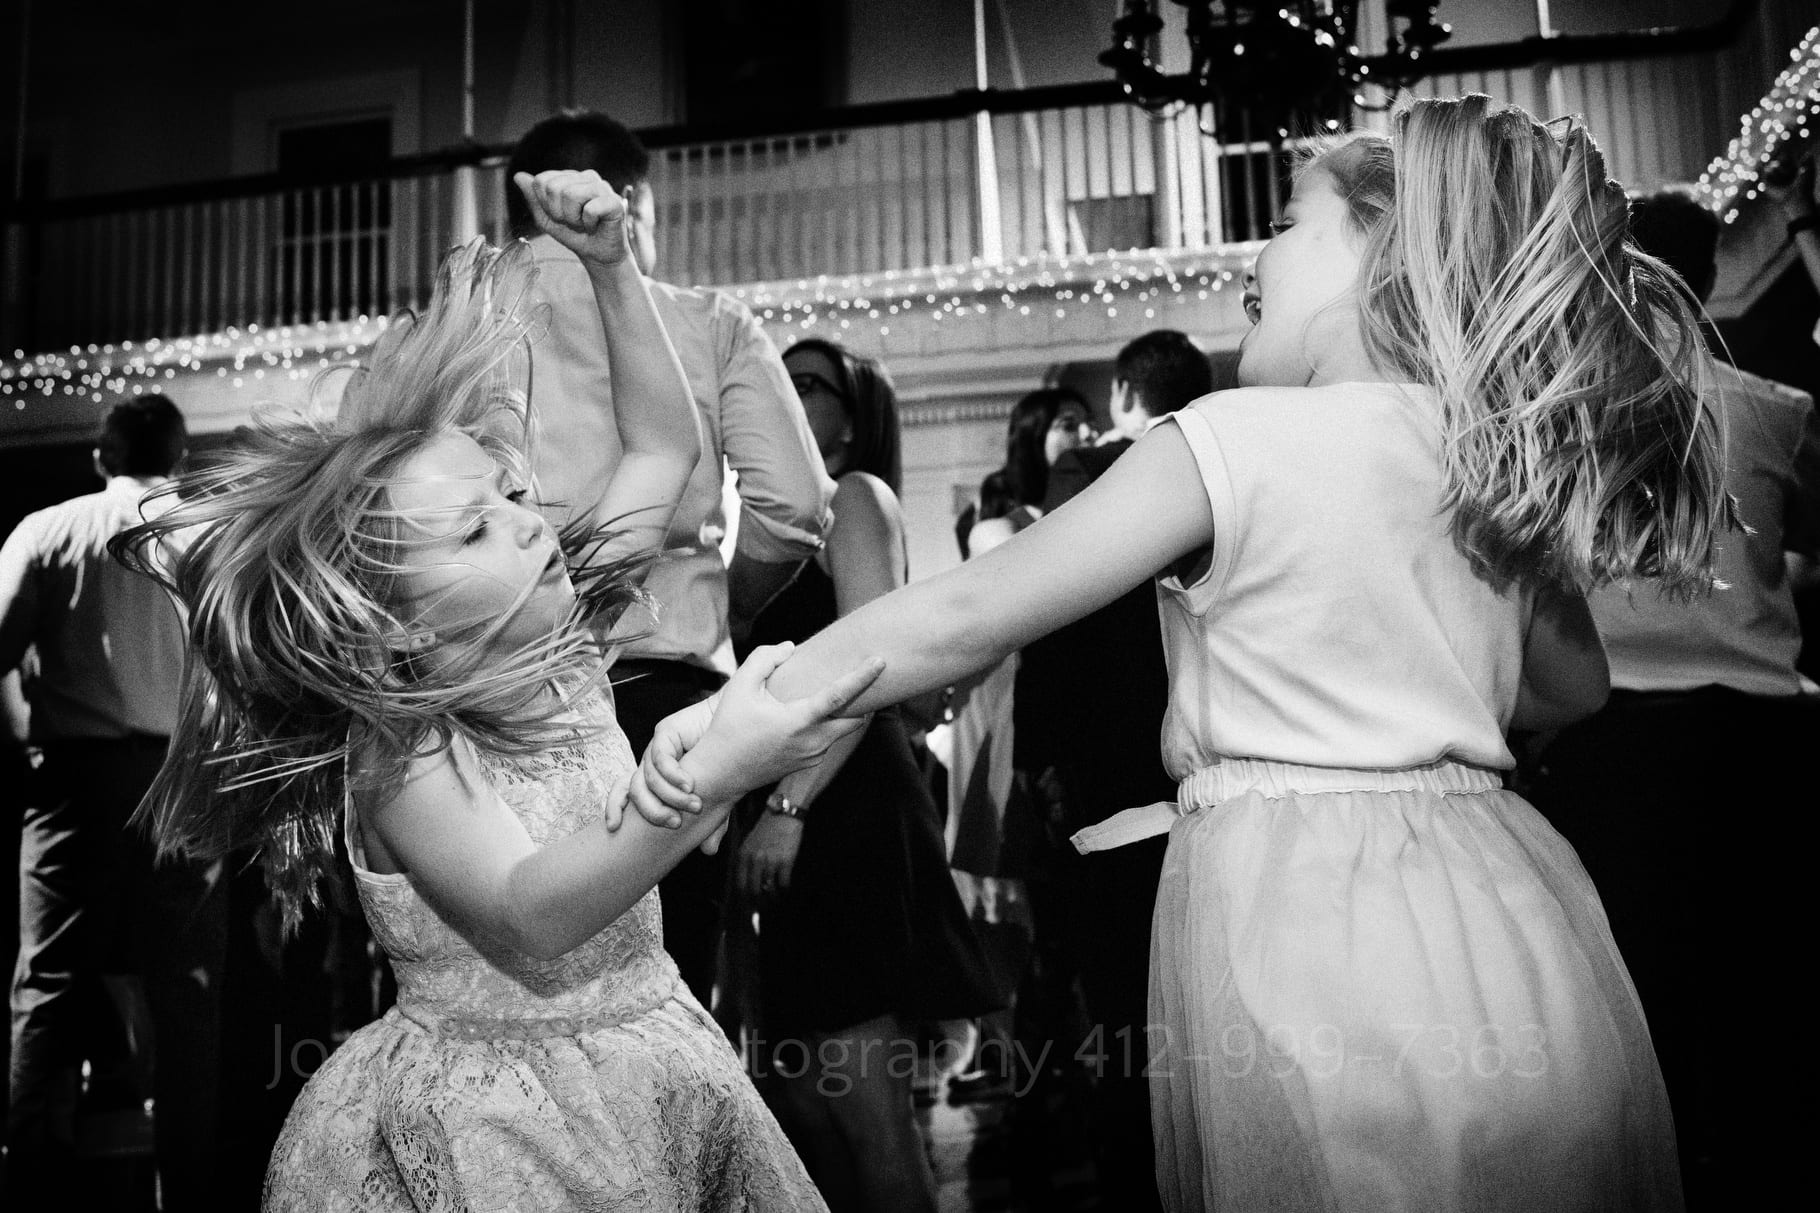 A little blonde girl raises her fist in the air as her hair flies up while dancing with another young girl at a wedding reception.